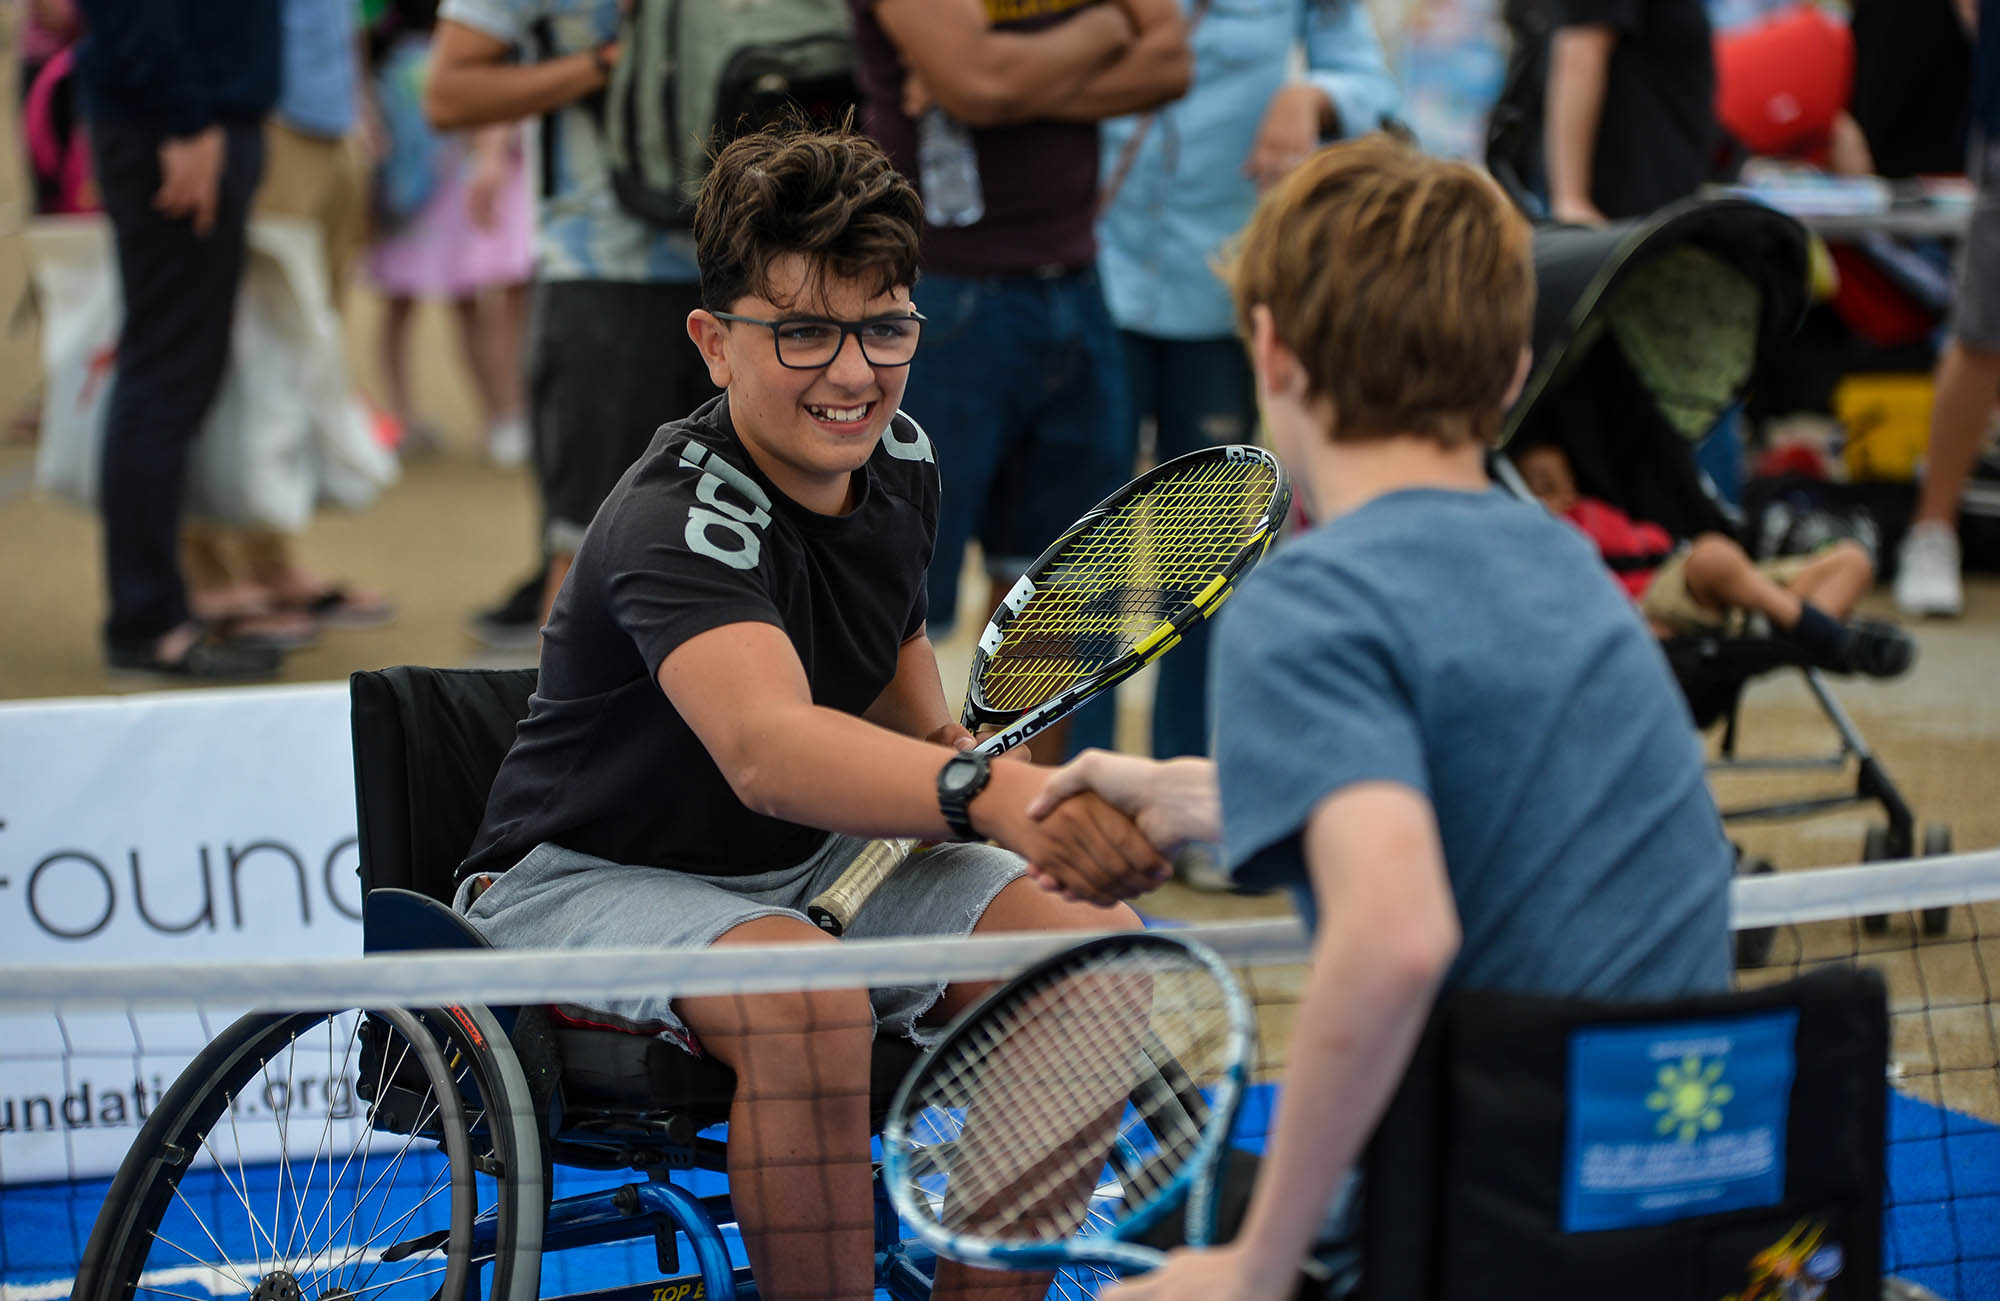 Two wheelchair players shaking hands over the net